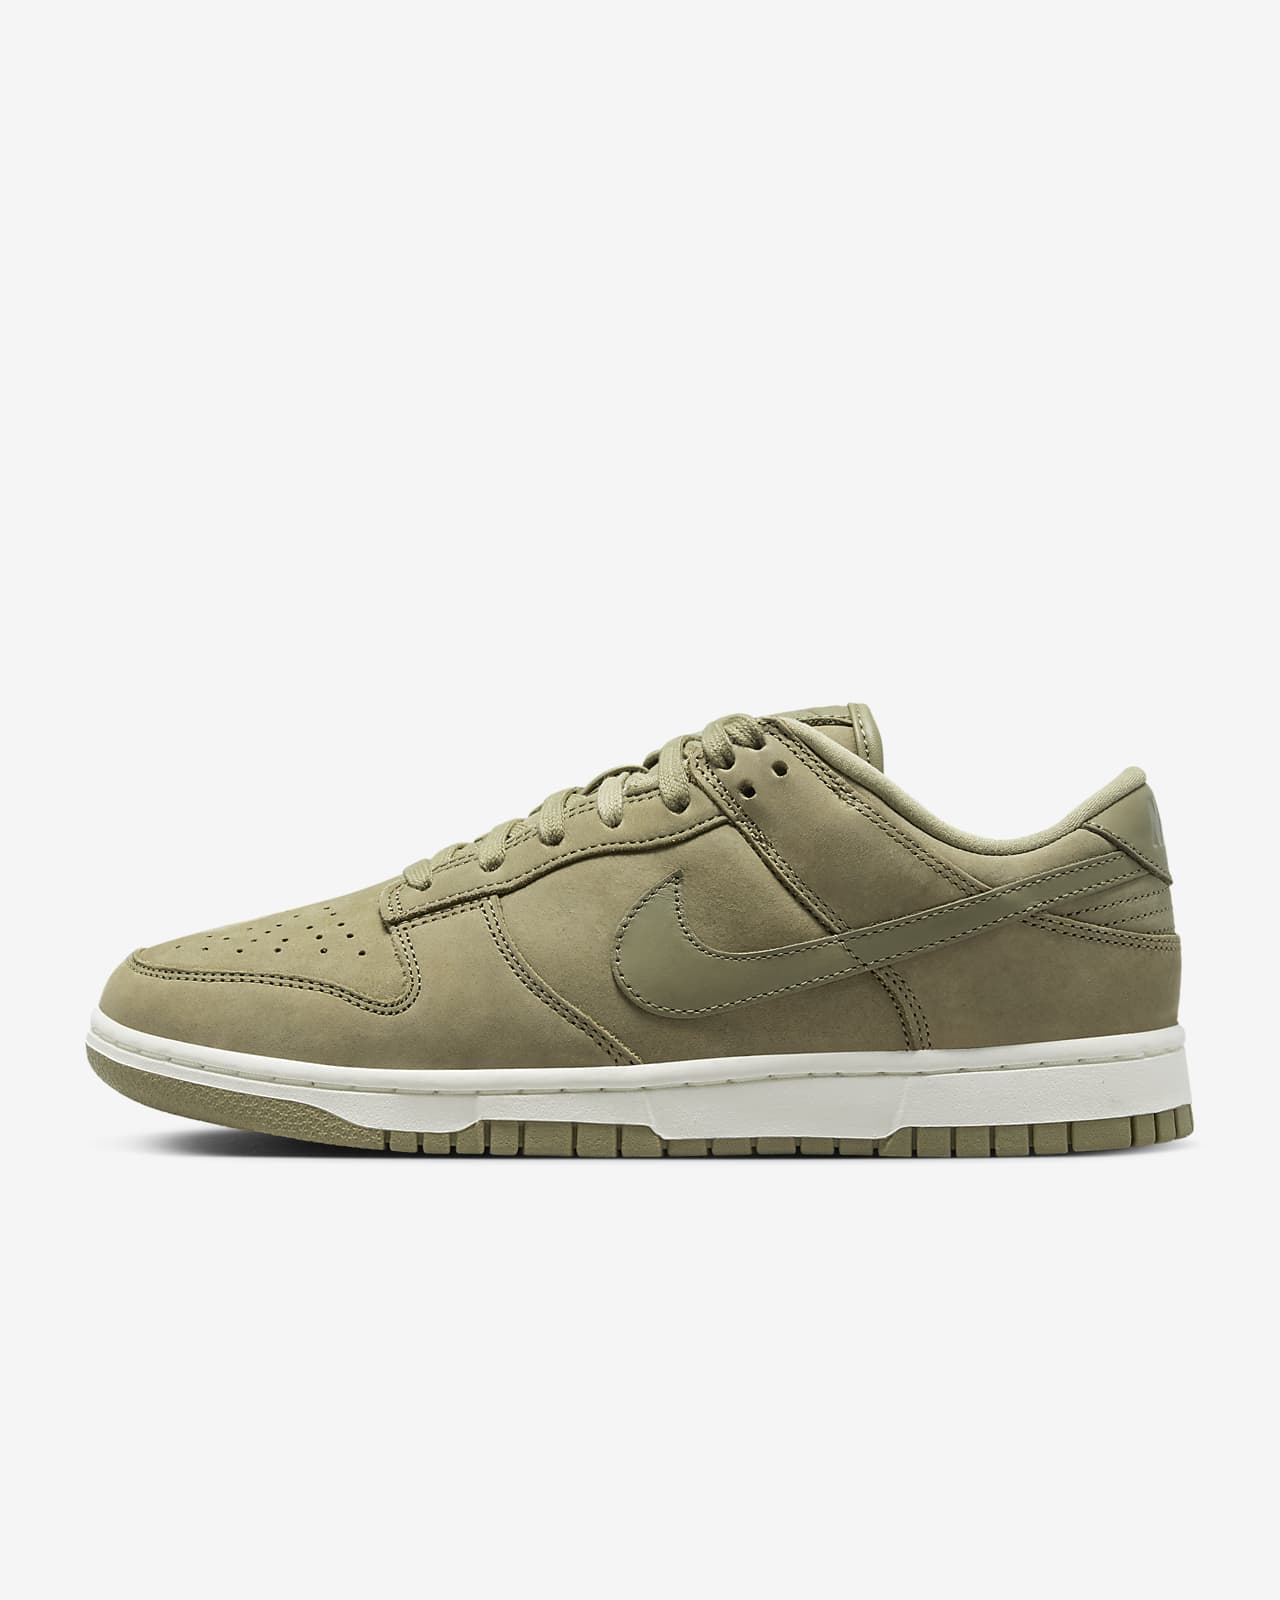 Nike Dunk Low Premium MF Womens Shoes Review